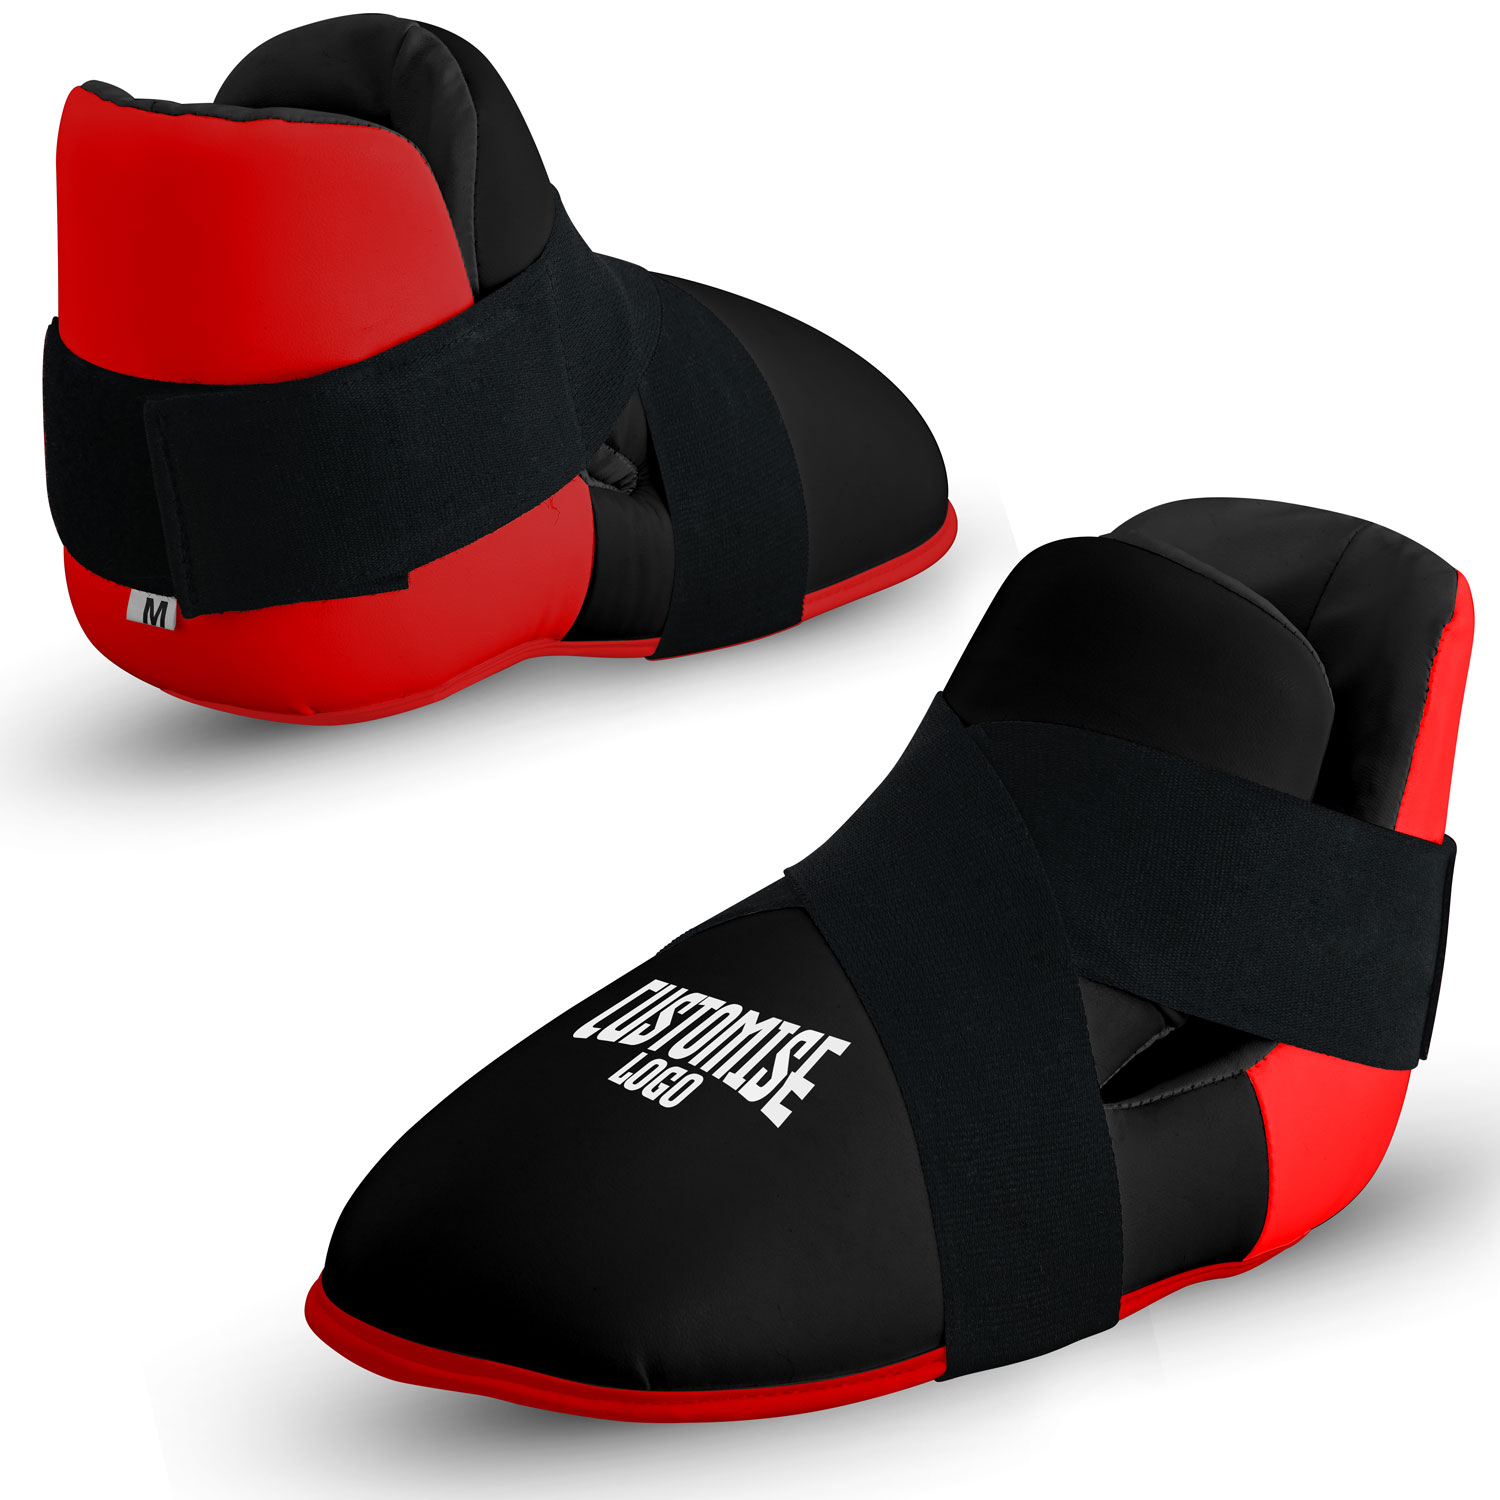 KICKBOXING FOOTGUARDS CUSTOMISED COLOURS AND SIZES ALONG WITH LOGO